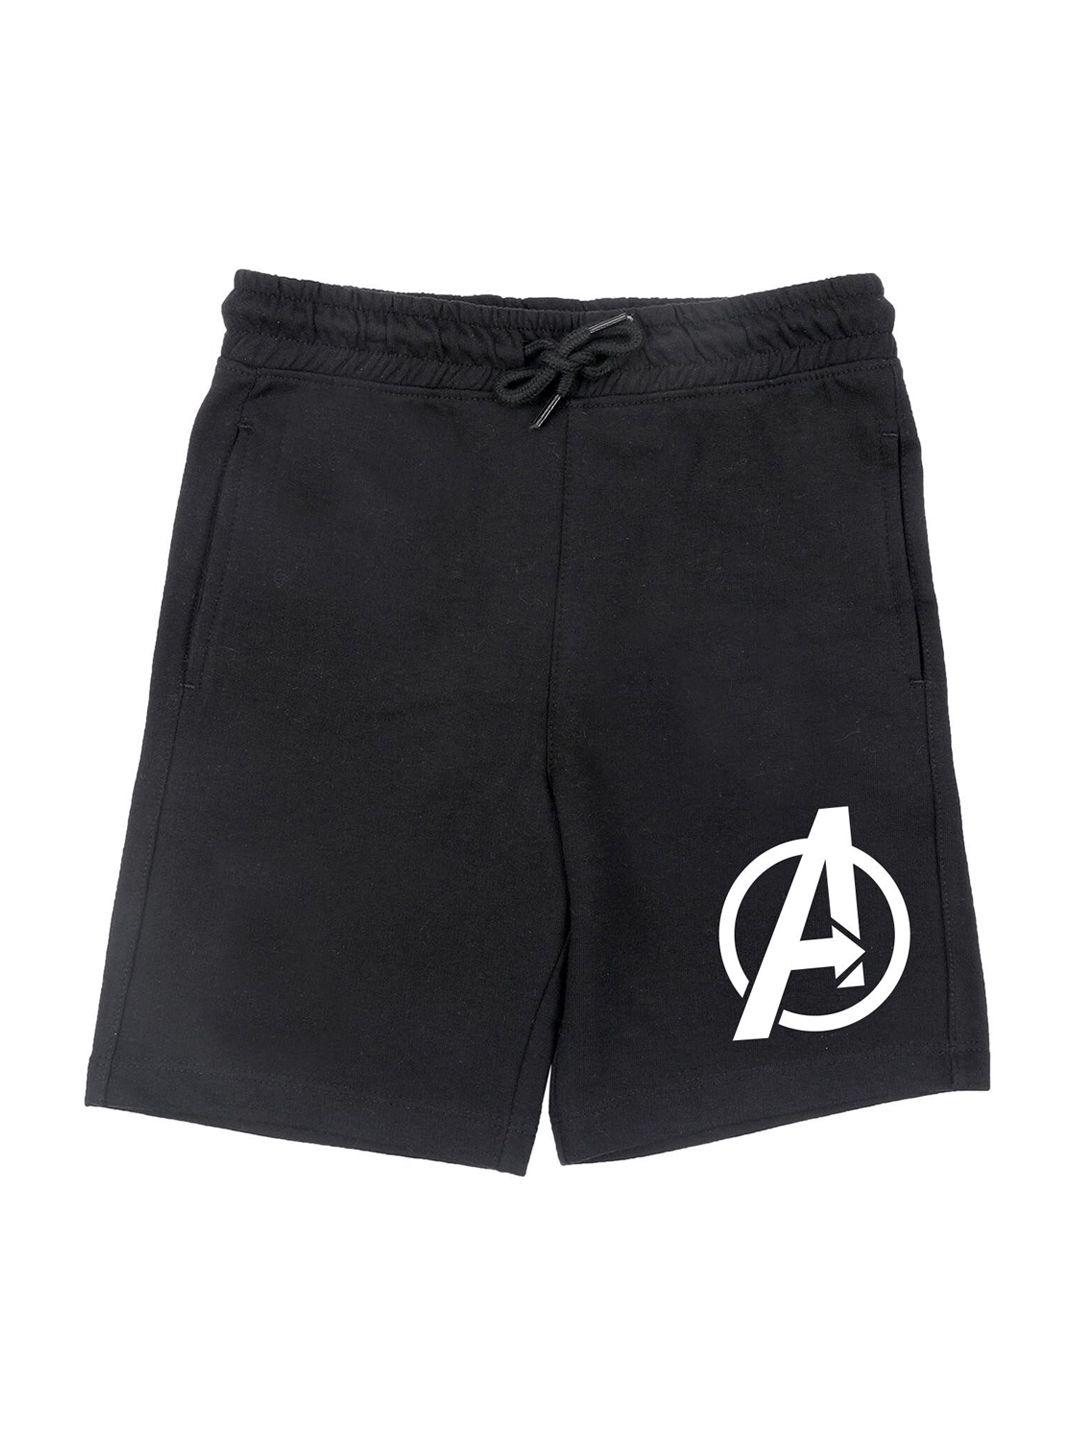 marvel-by-wear-your-mind-boys-black-avenger-graphic-print-shorts